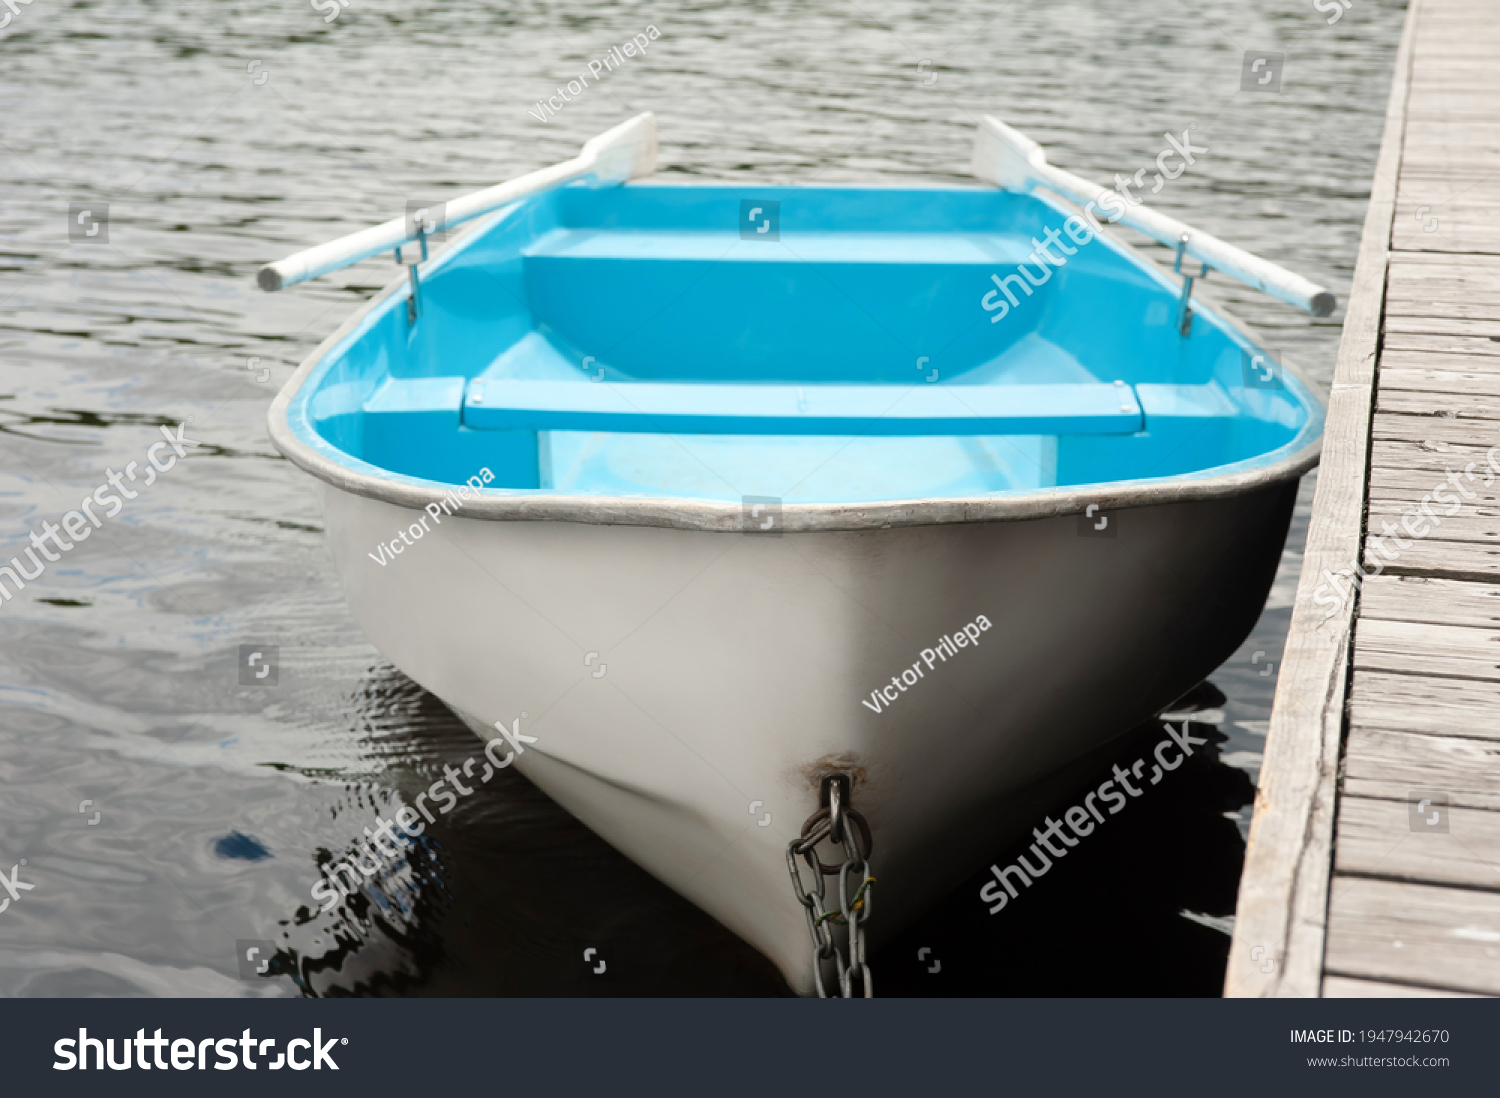 A blue and white boat with oars stands on the water at a wooden pier #1947942670